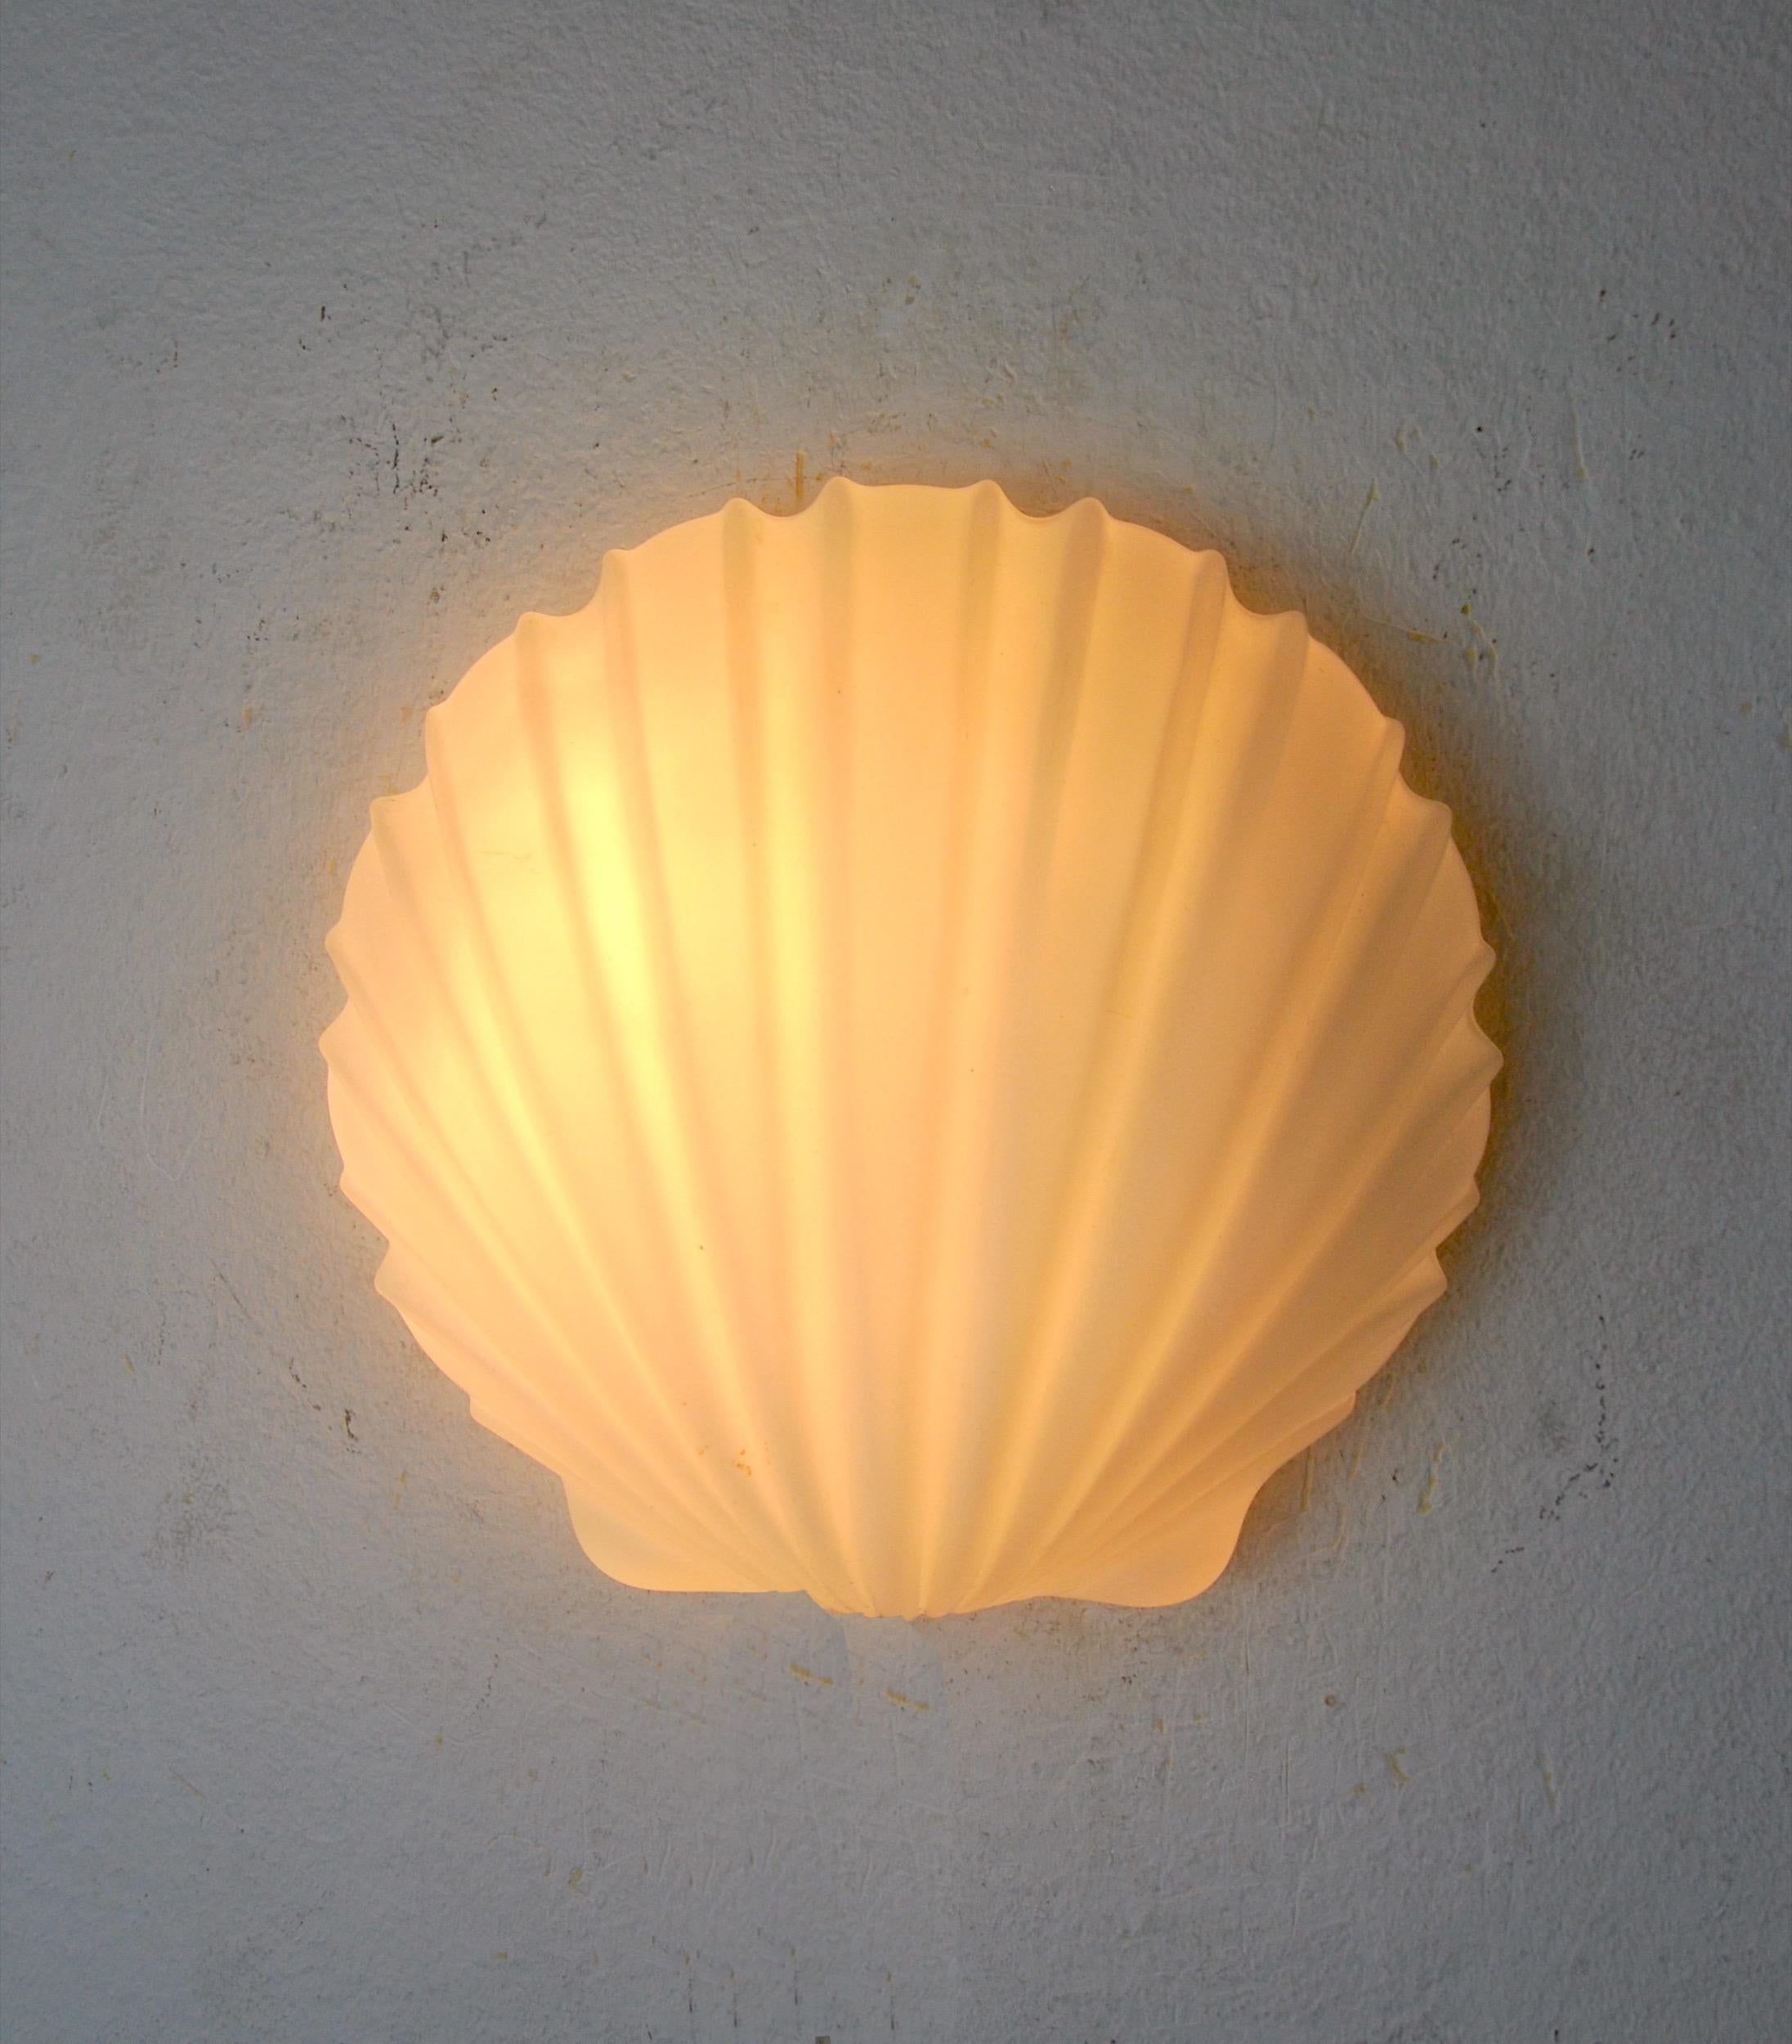 Beautiful shell wall lamp designed and produced in italy in the 1980s.
Design wall lamp in the shape of shell in opal glass blan.
Unique object that will illuminate wonderfully and bring a real design touch to your interior.
Verified electricity,